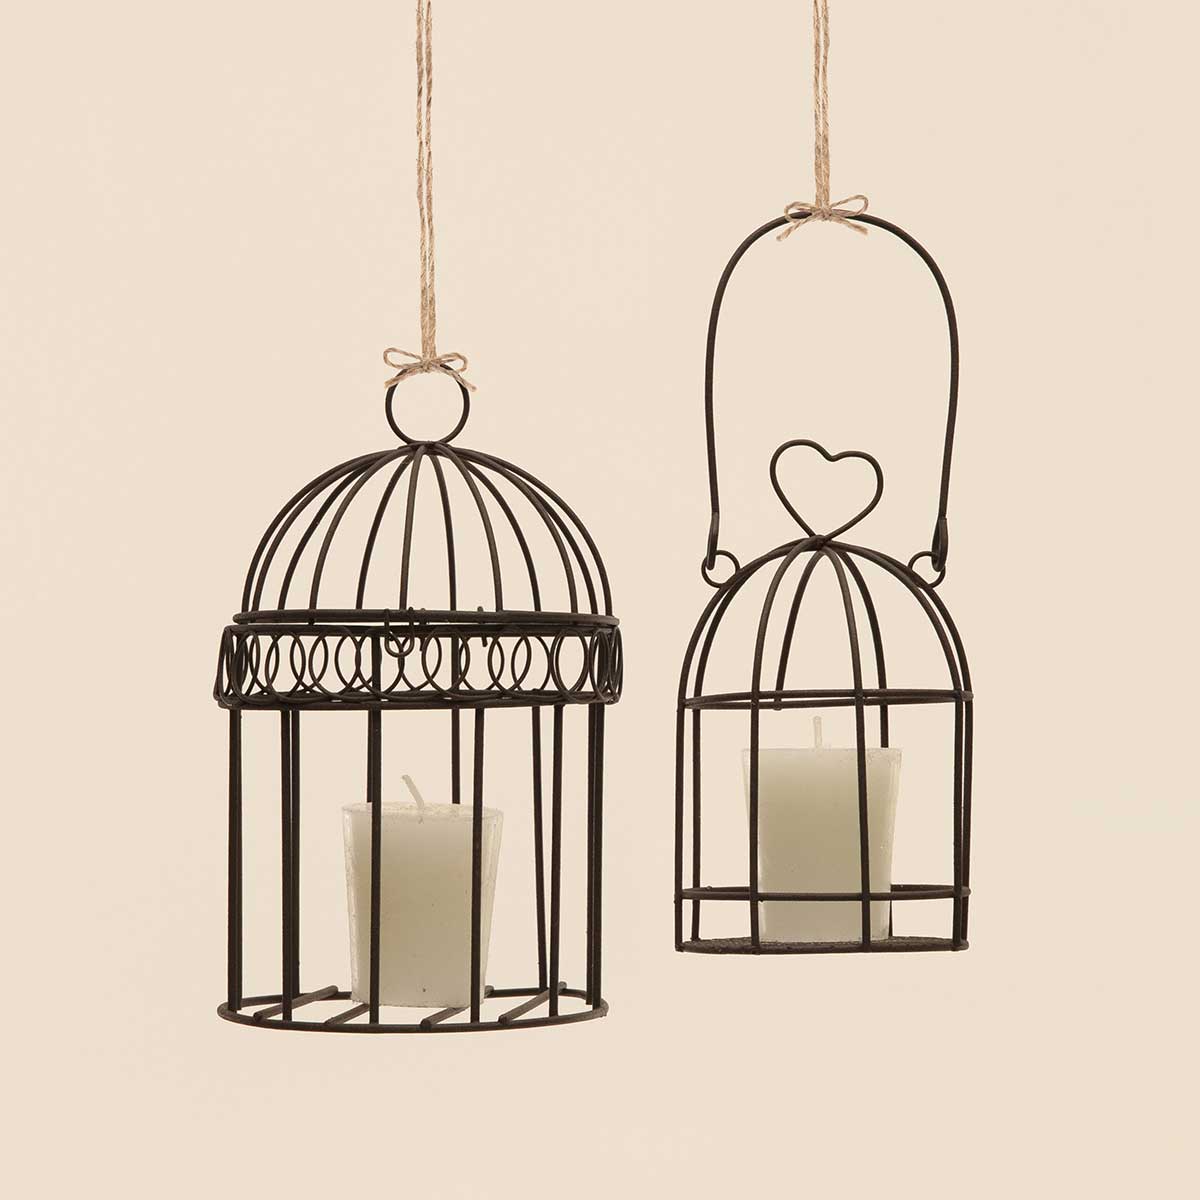 BIRD CAGE BROWN 4IN X 6.5IN BROWN METAL WITH TOP OPENING